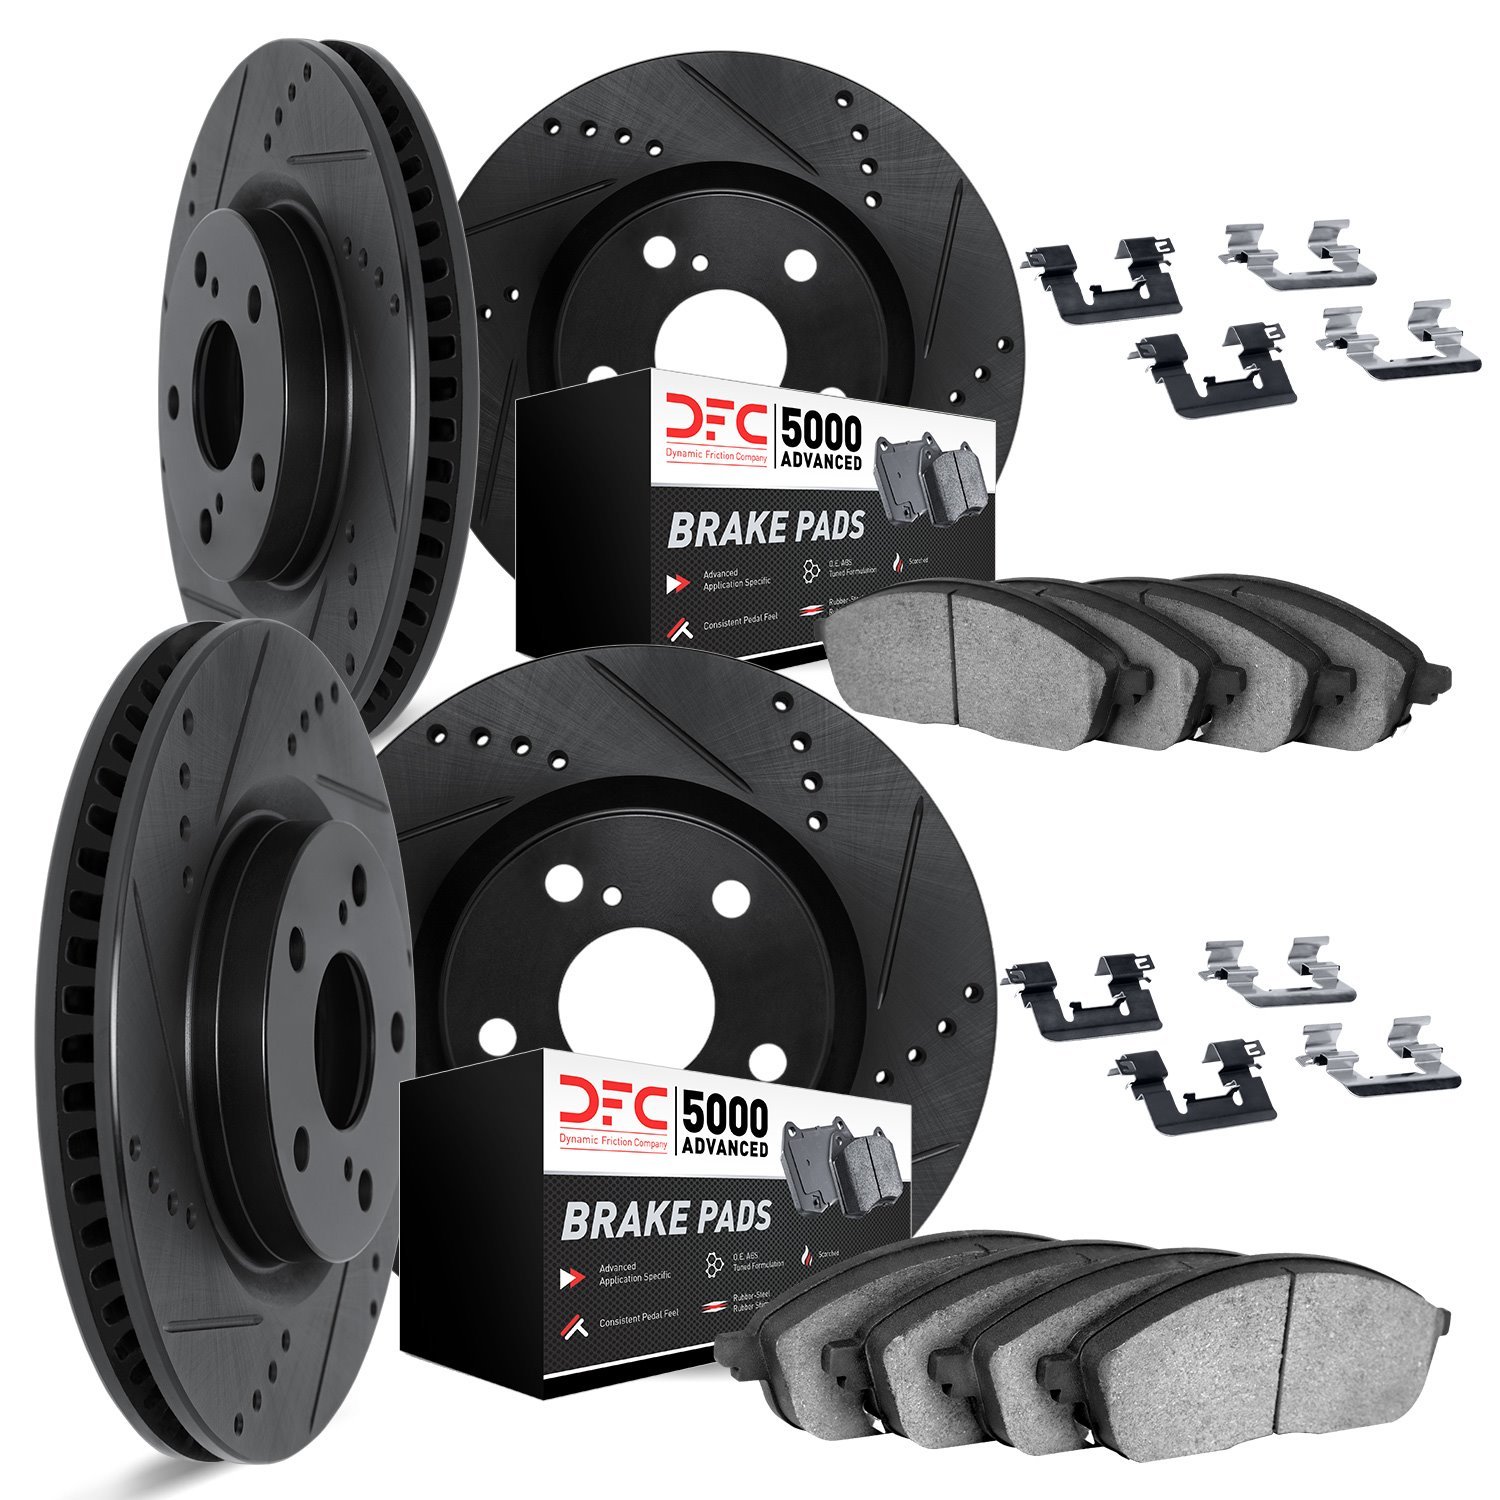 8514-31056 Drilled/Slotted Brake Rotors w/5000 Advanced Brake Pads Kit & Hardware [Black], 2008-2014 BMW, Position: Front and Re